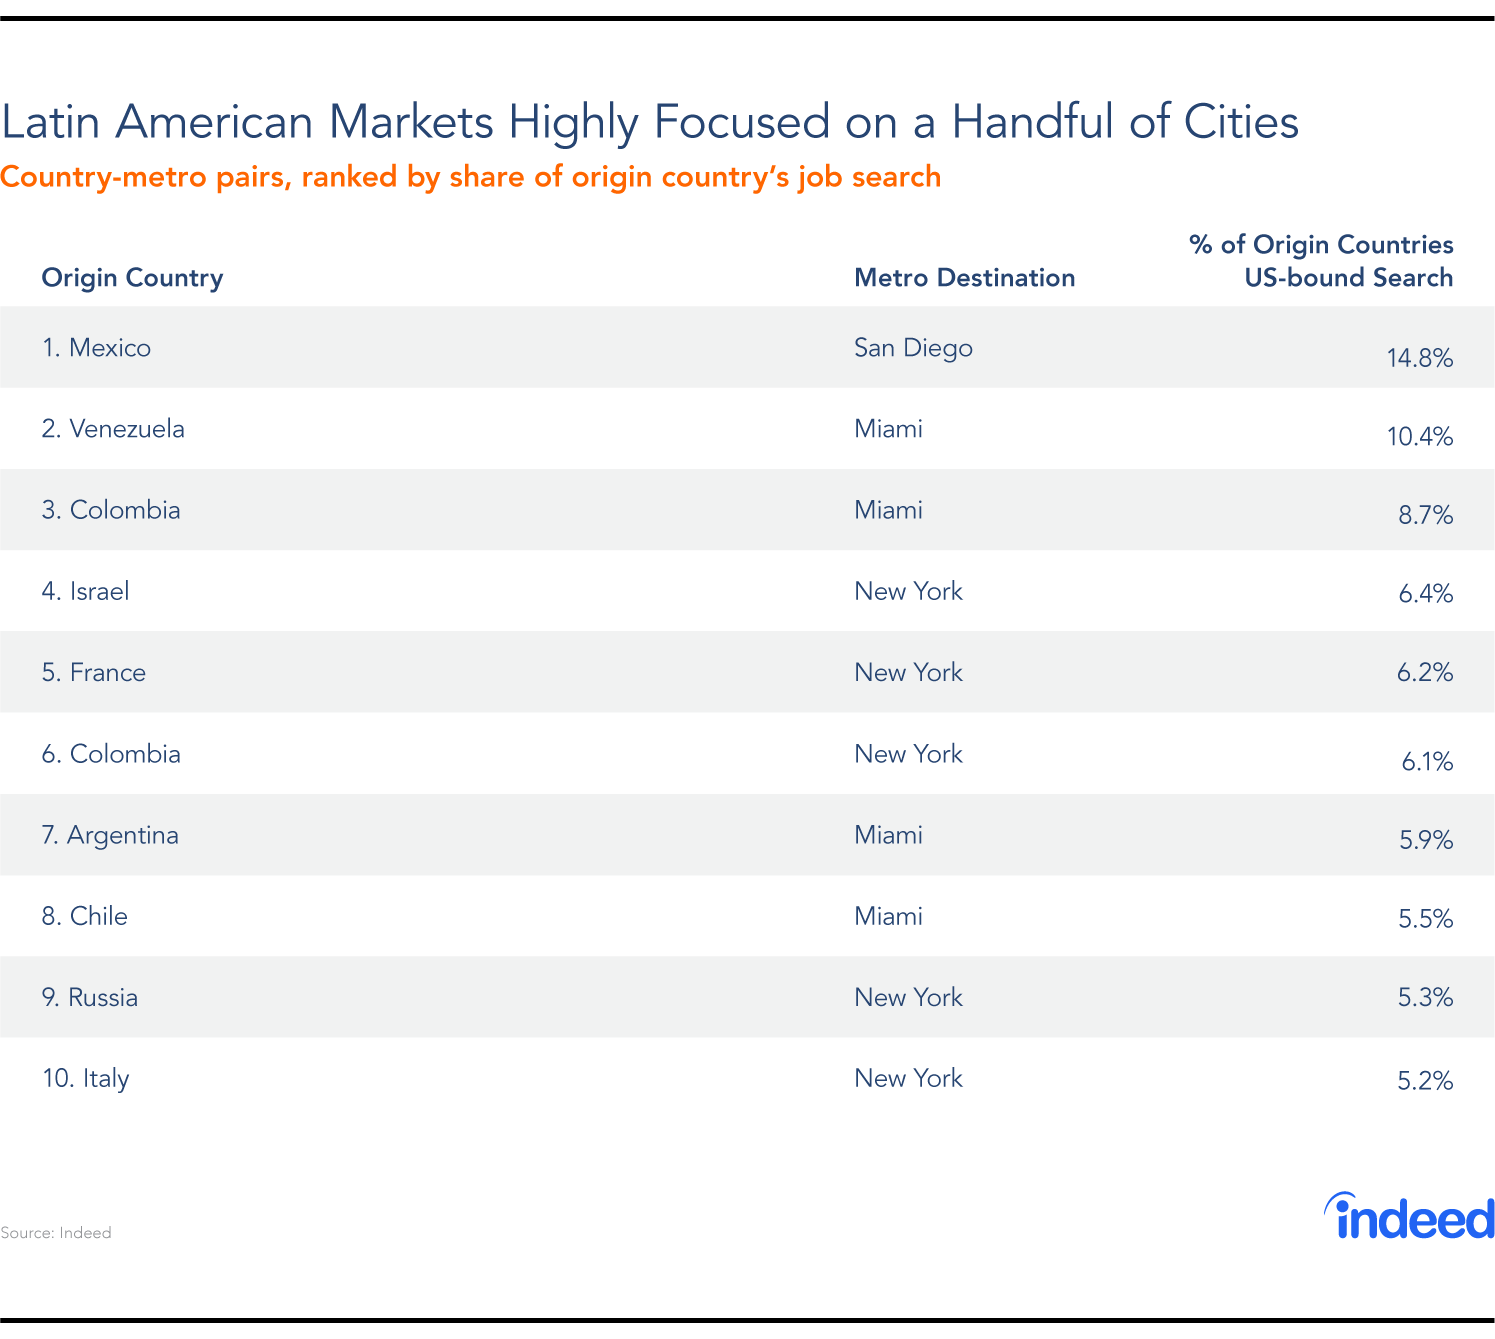 Latin American Markets Highly Focused on a Handful of Cities